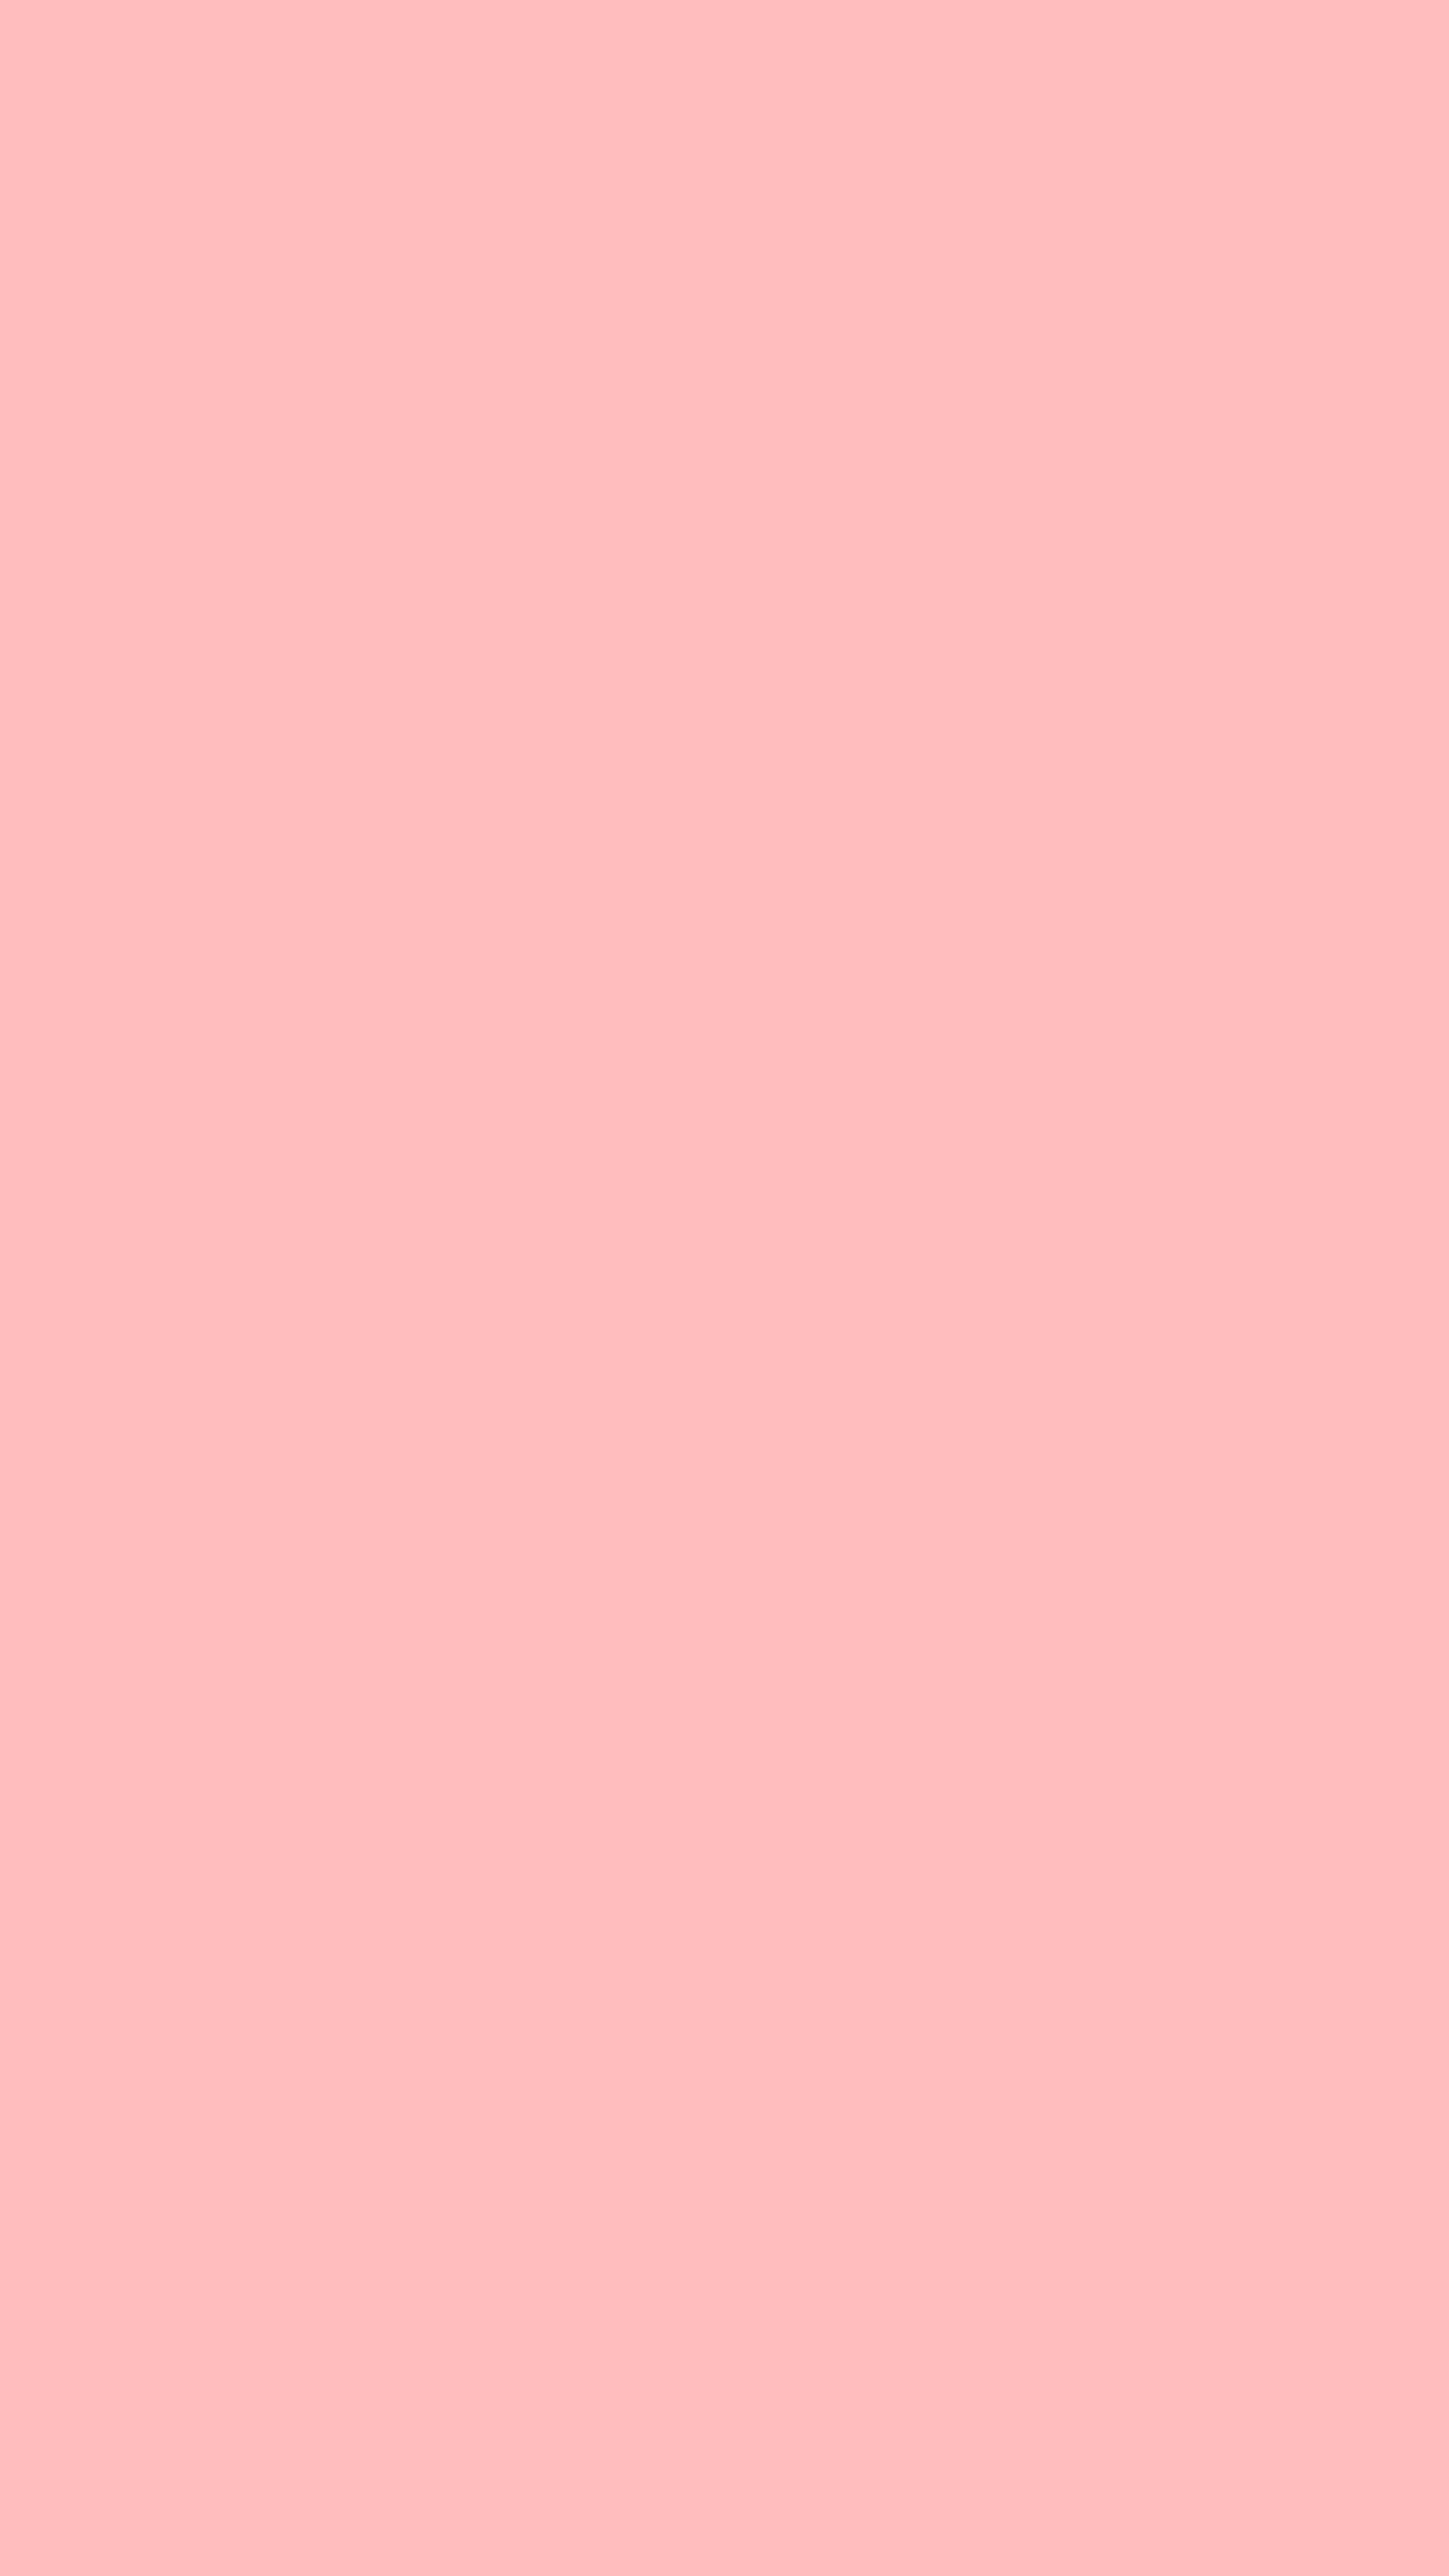 Pretty Pink Plain Color Background Behang[ae2a355c08f645d5a3f9]